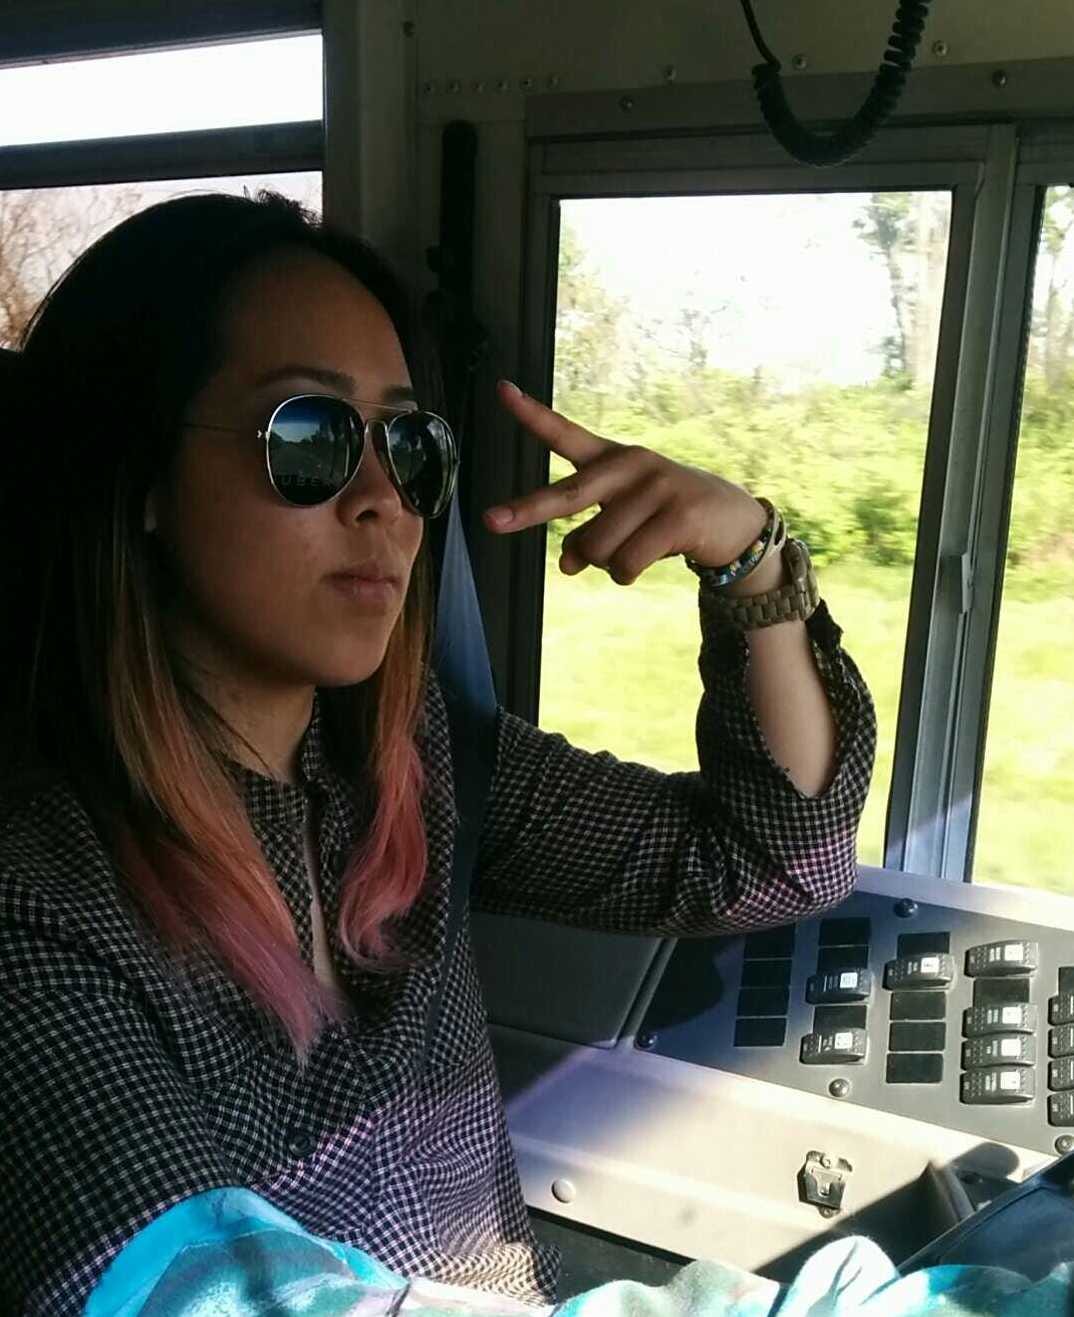 Losa throwing up the peace sign in the bus